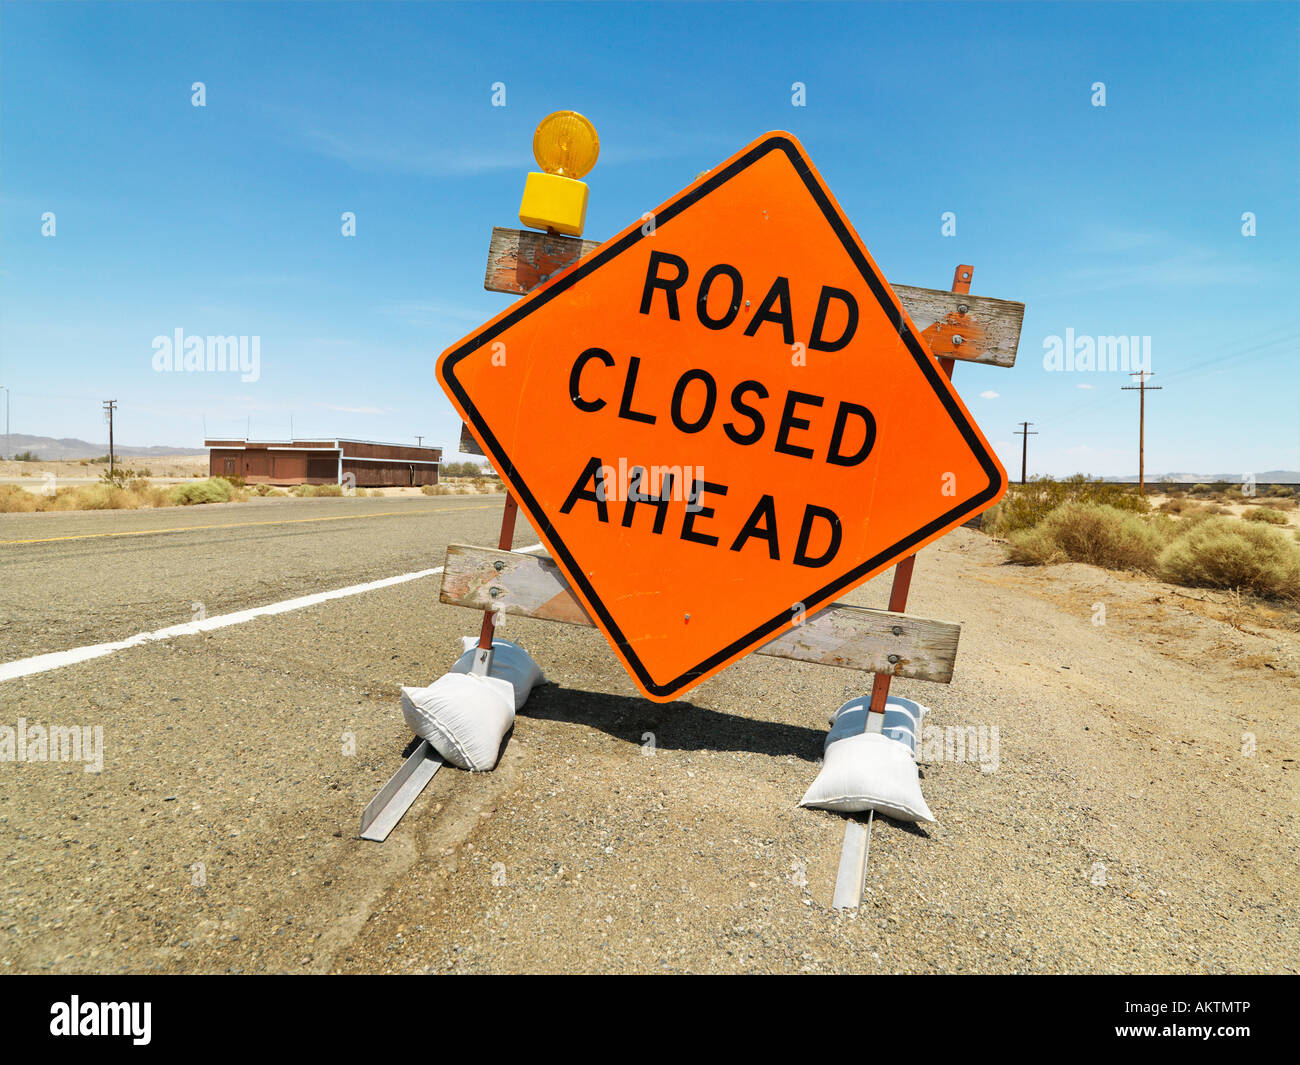 Road sign on rural highway warning that road is closed ahead Stock Photo